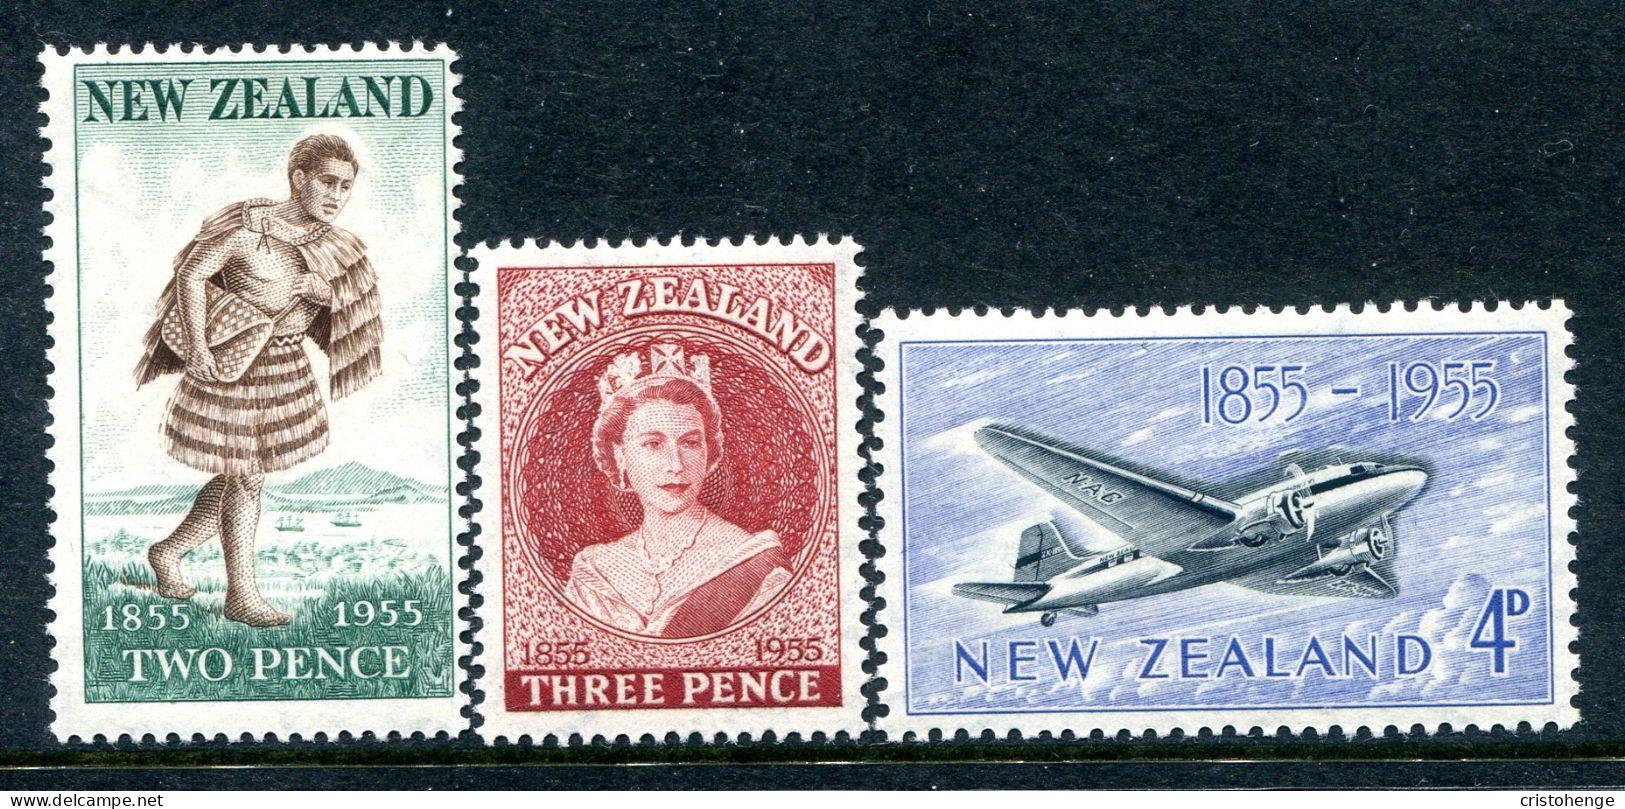 New Zealand 1955 Centenary Of First New Zealand Postage Stamps Set HM (SG 739-741) - Neufs